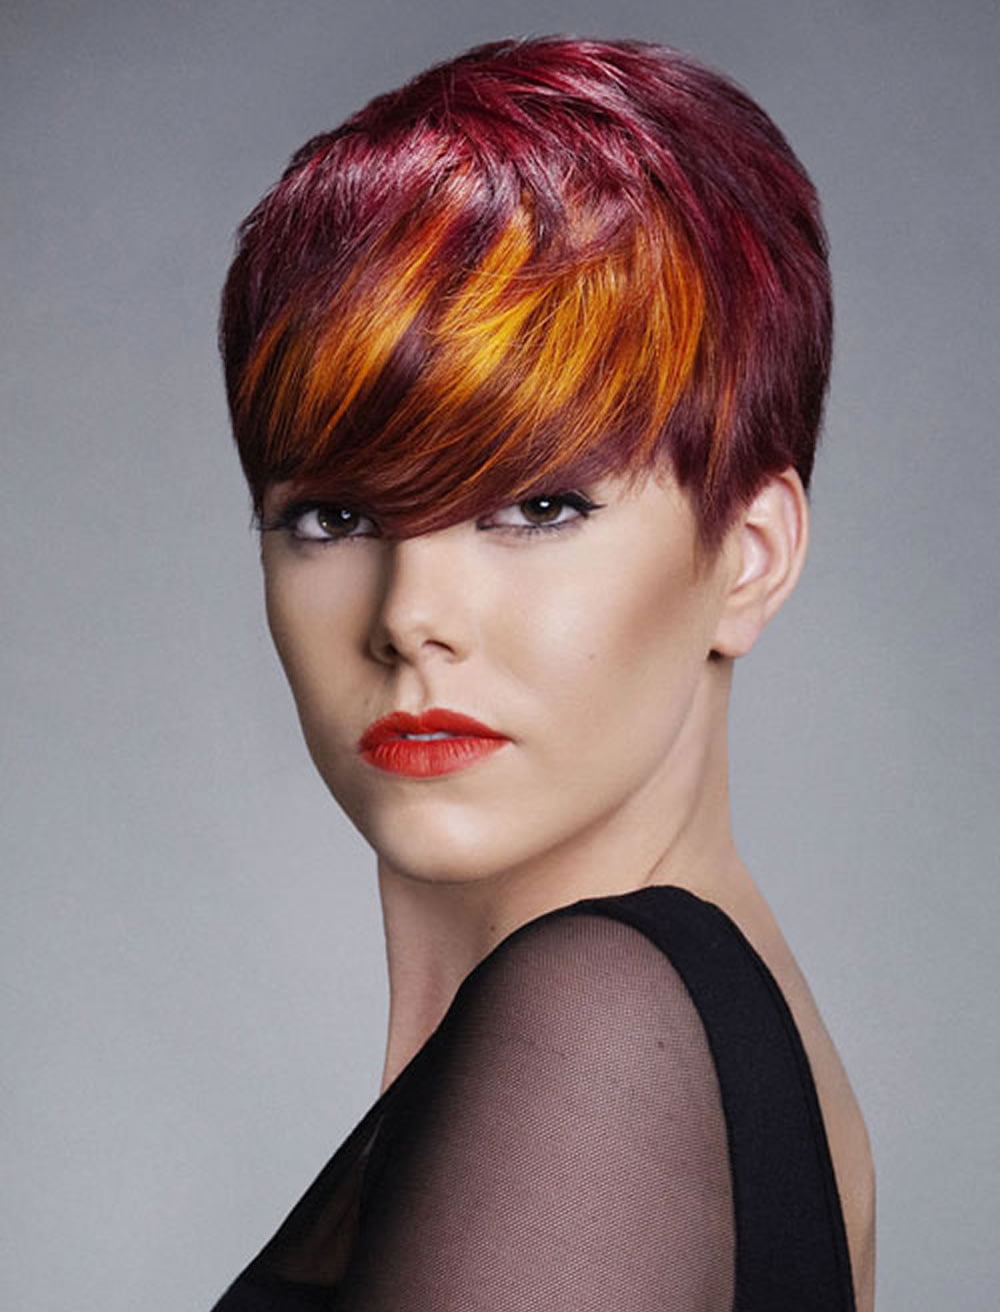 Red Hair Color Descriptions - Best Hairstyles Ideas for Women and Men ...